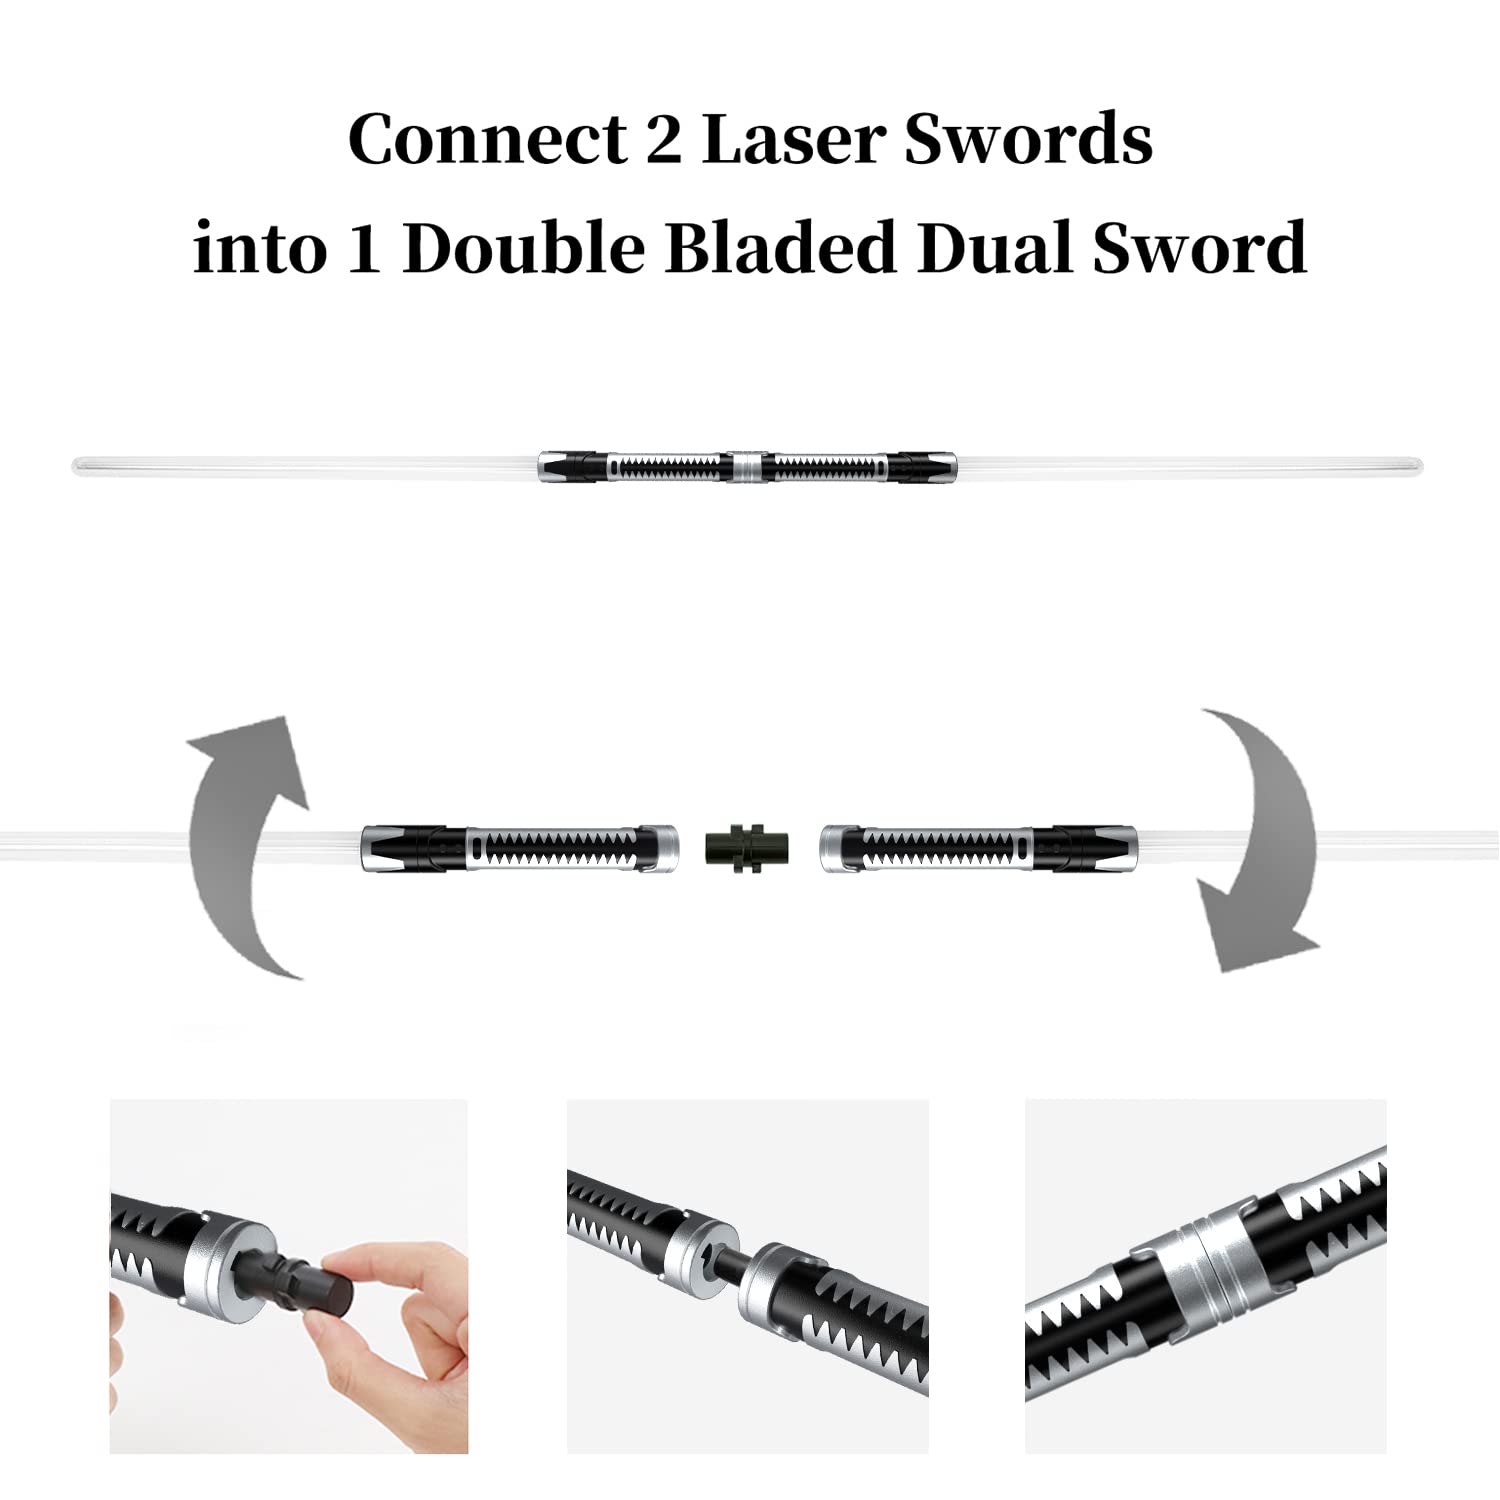 Beyondtrade Lightsabers Toy 7 Colors 2-in-1 LED Dual Swords for Kids with FX Sound (Motion Sensitive) for Movie Fans Cosplay Party Christmas Birthday Gift